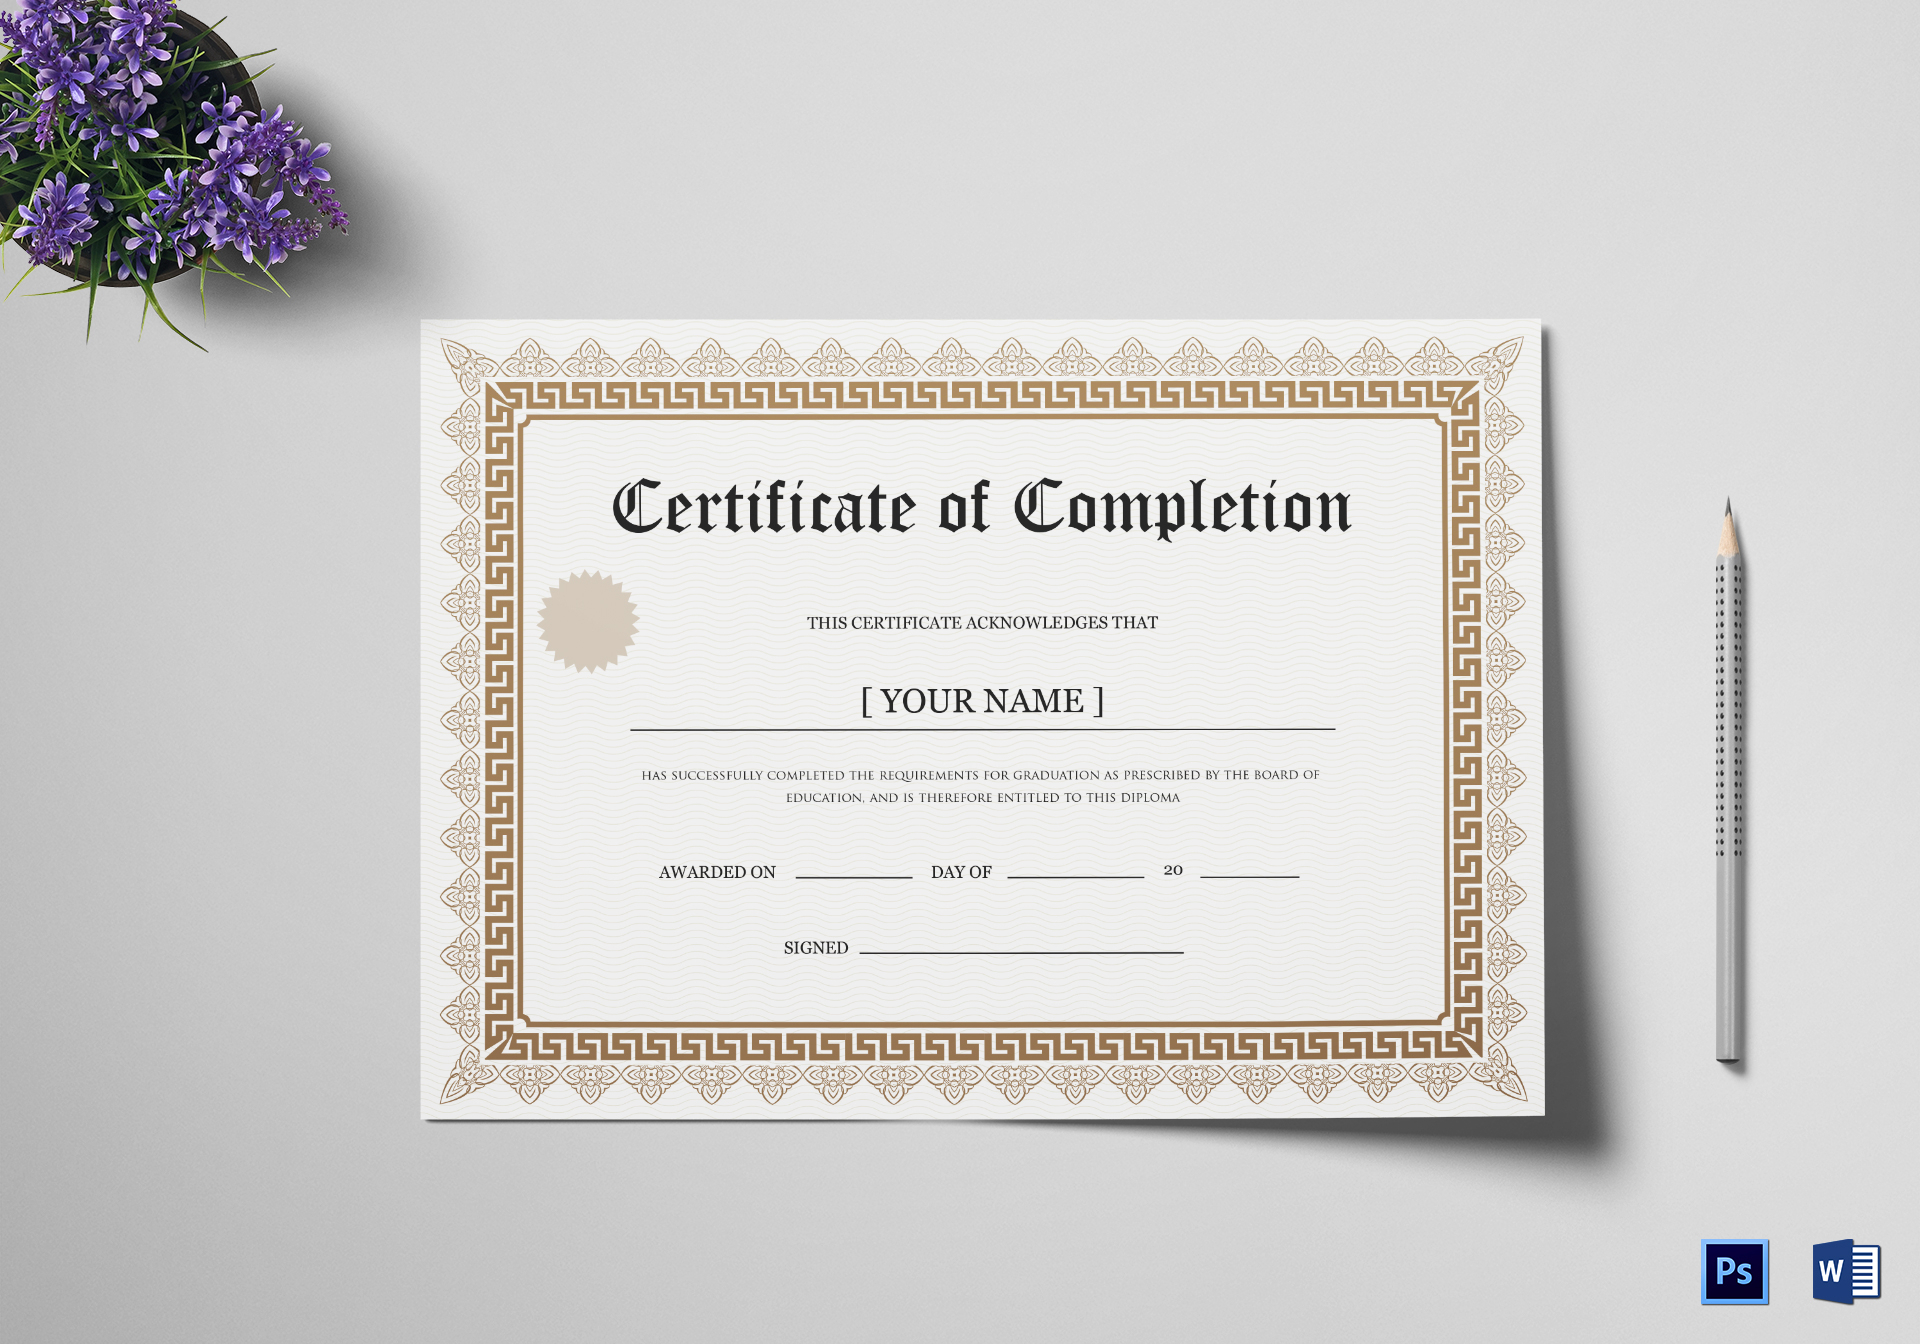 Bachelor Degree Completion Certificate Template throughout Masters